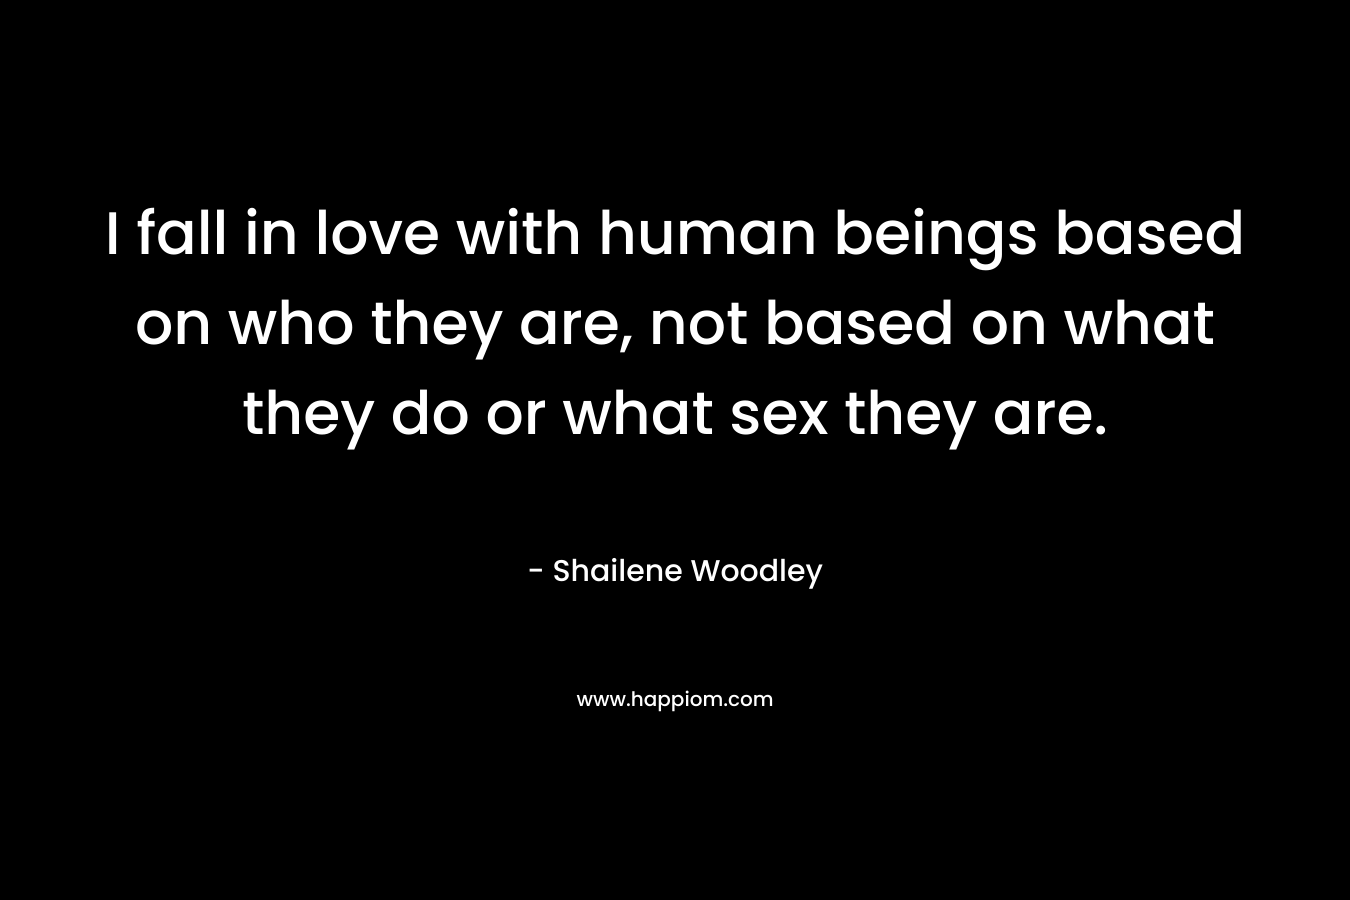 I fall in love with human beings based on who they are, not based on what they do or what sex they are.